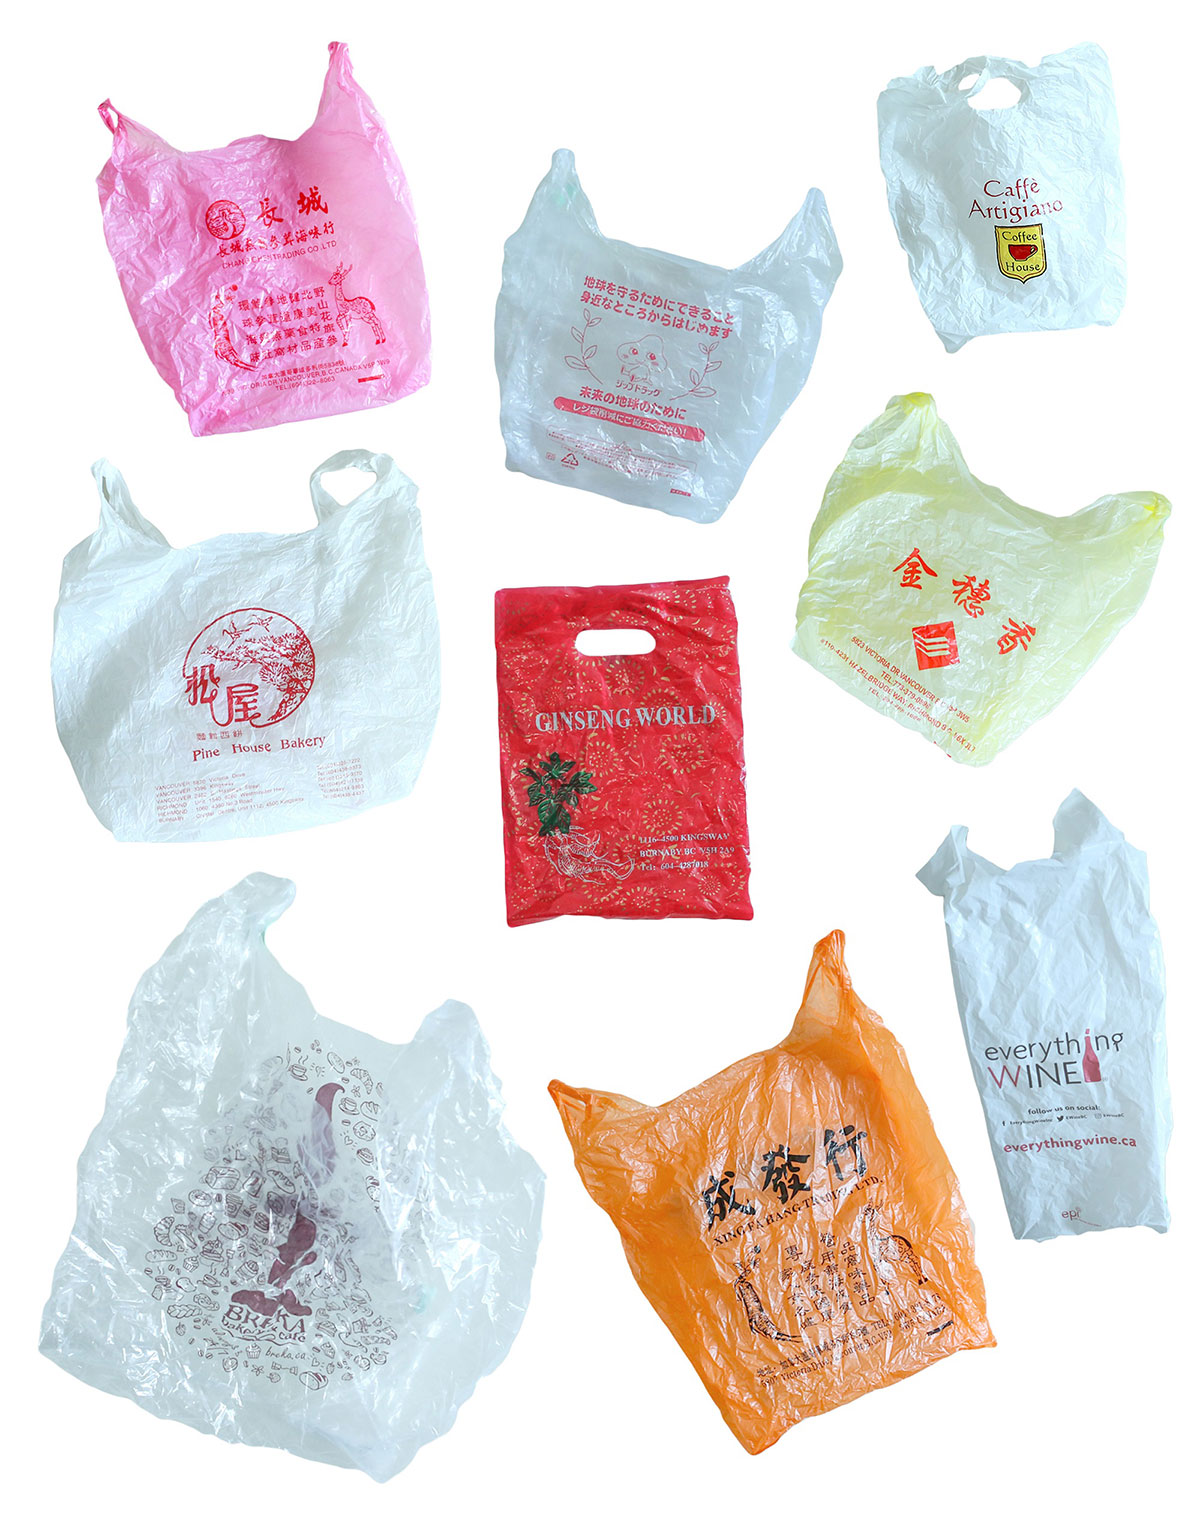 A selection of plastic bags from local Vancouver businesses against a white background.